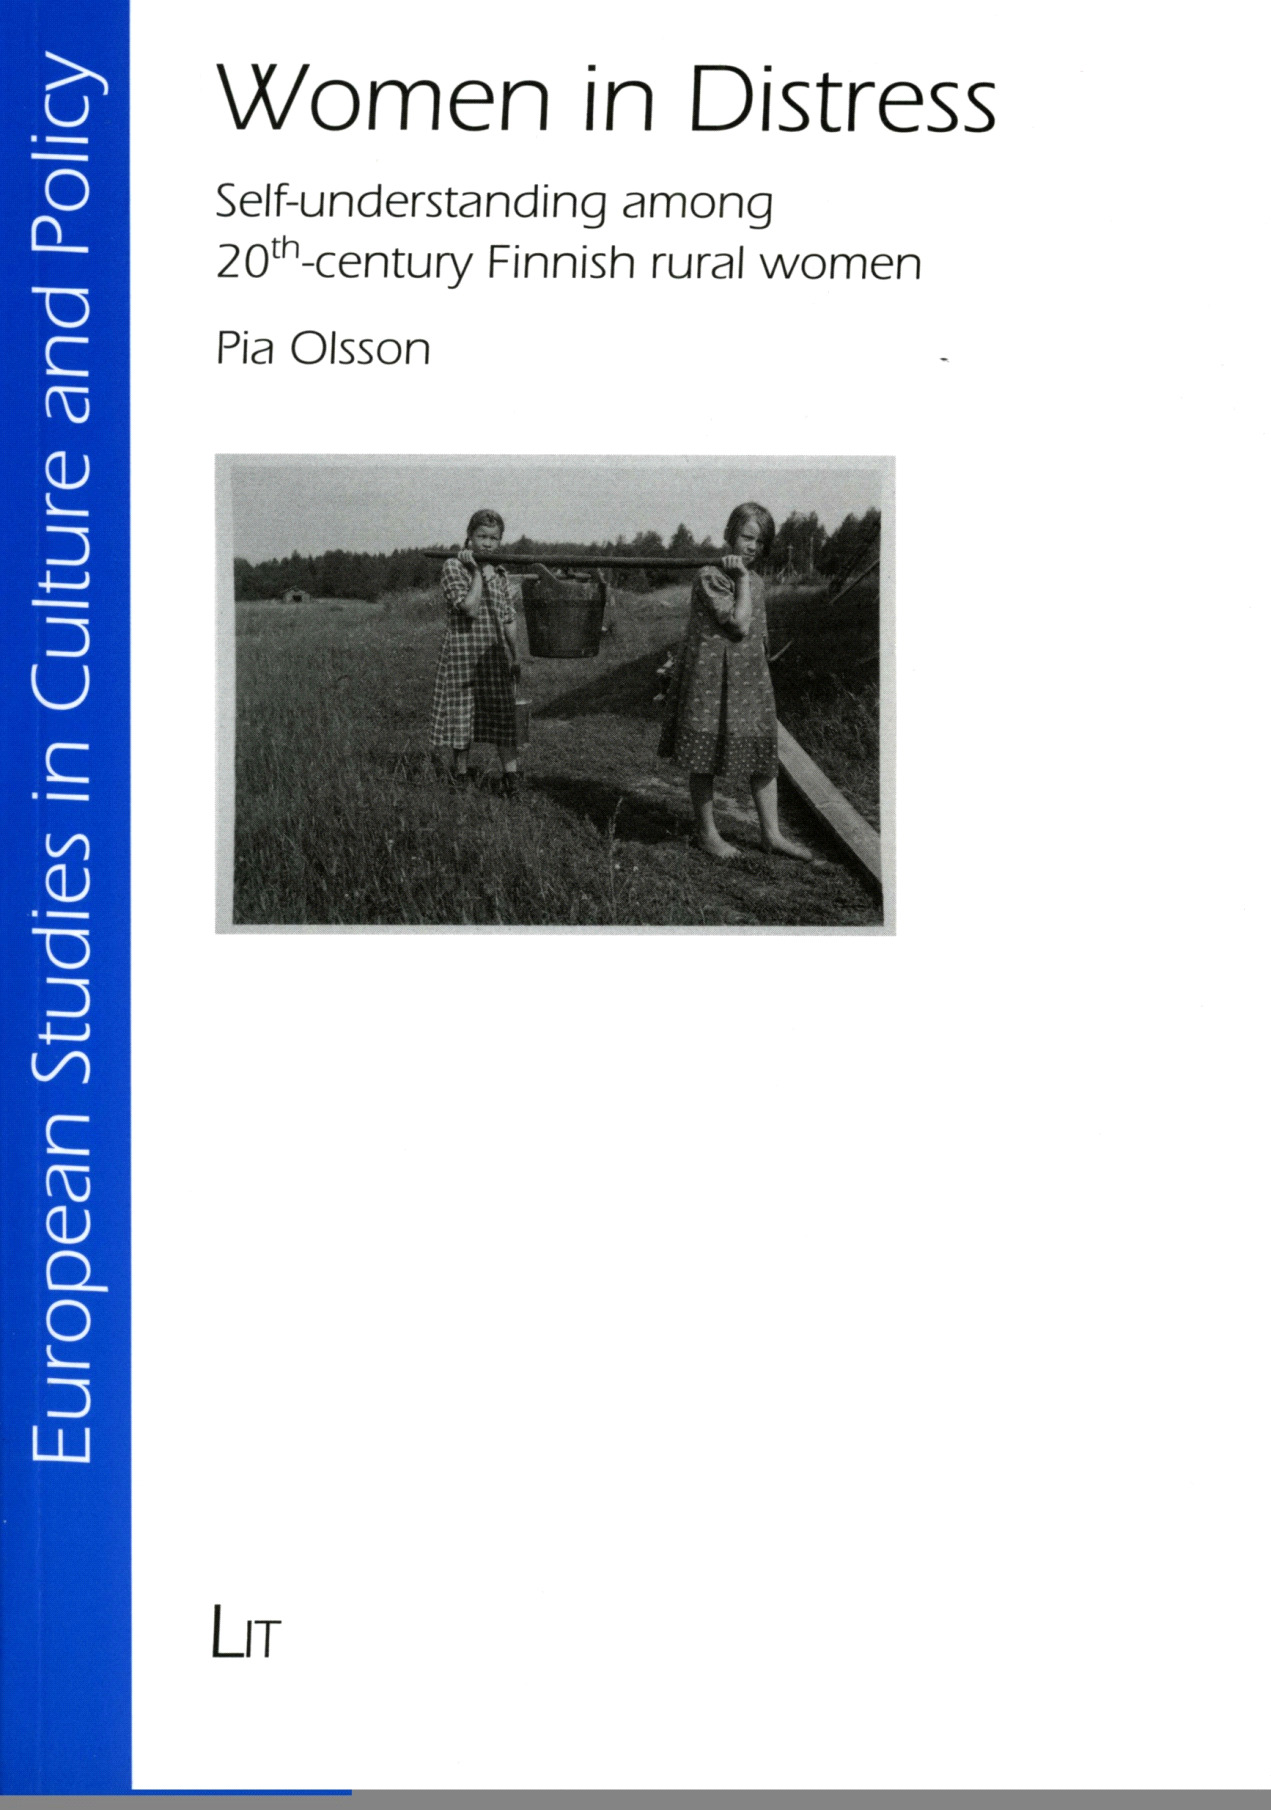 Pia Olsson Women in Distress Self-understanding among 20th-century Finnish rural women Series: European Studies in Culture and Policy Bd. 11, 2011, 288 pp, 29.